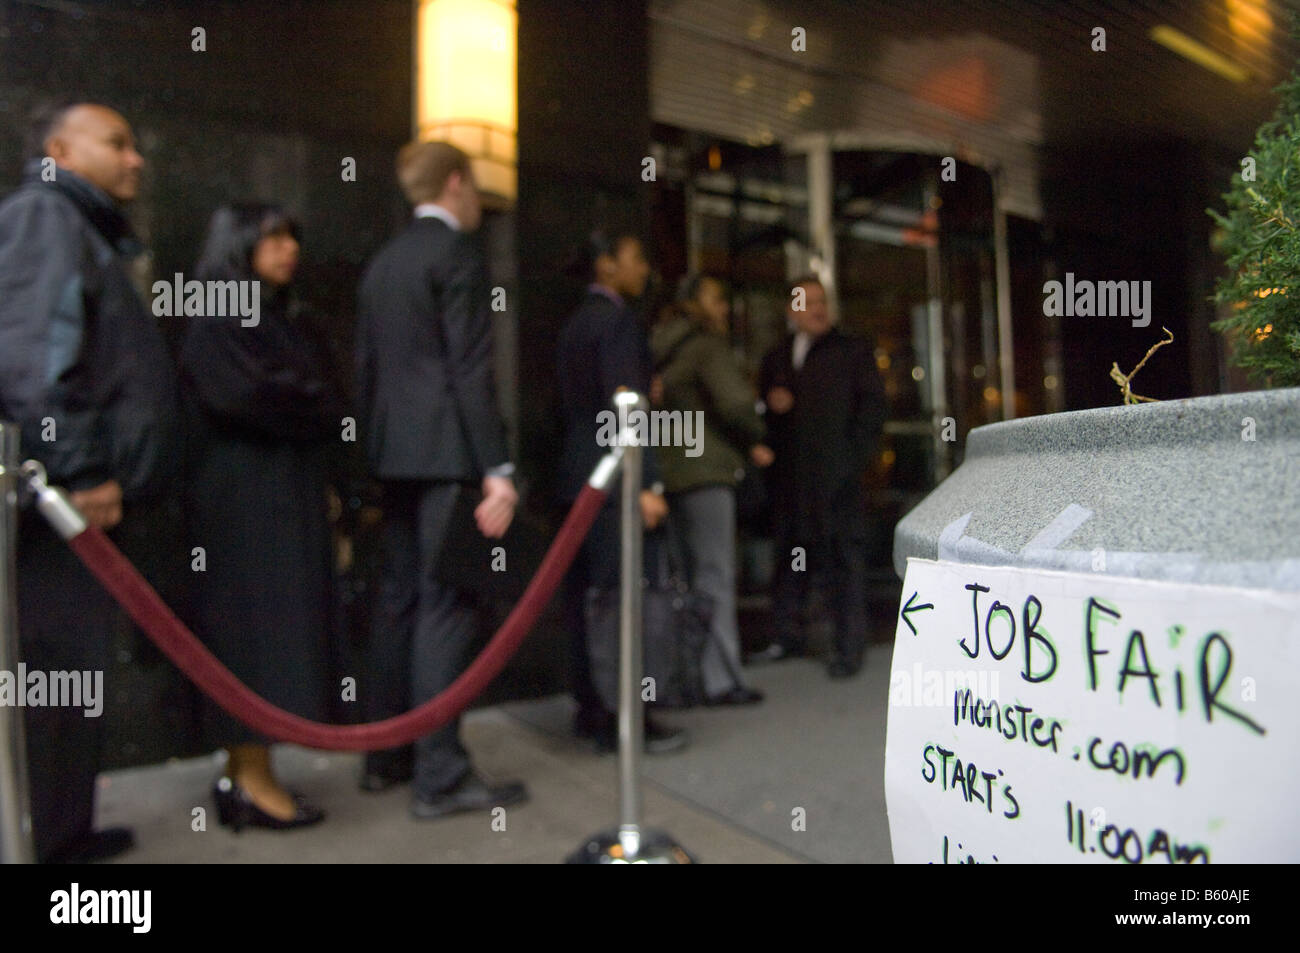 Hundreds of people line up in New York at a job fair sponsored by the website Monster com Stock Photo